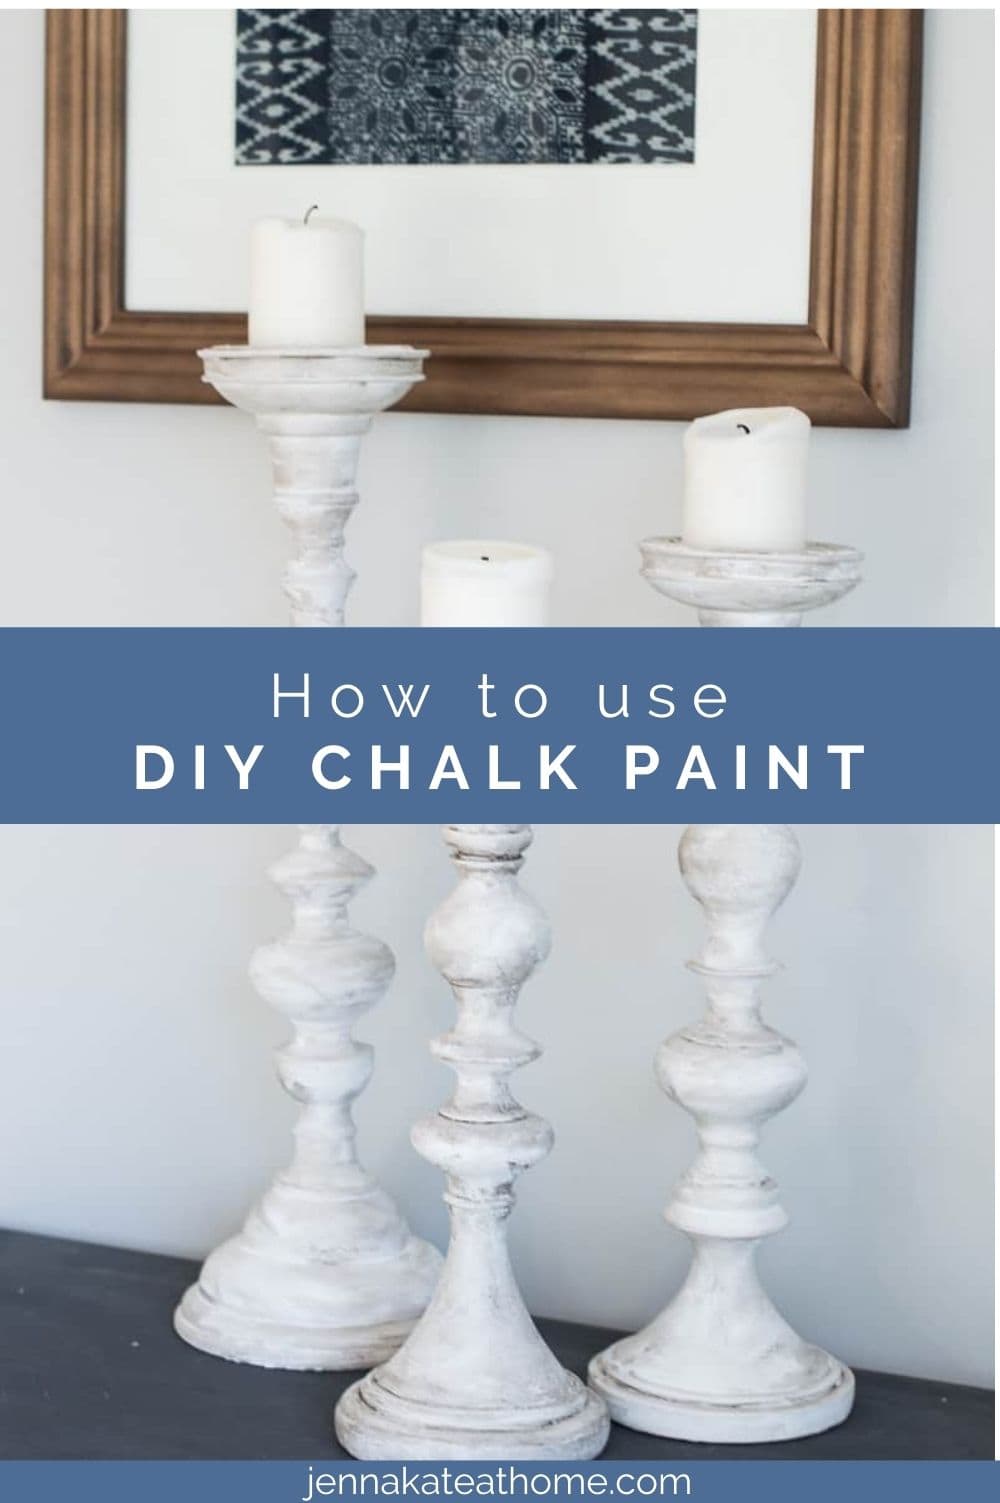 Make your own easy DIY Chalk Paint Recipe for Furniture